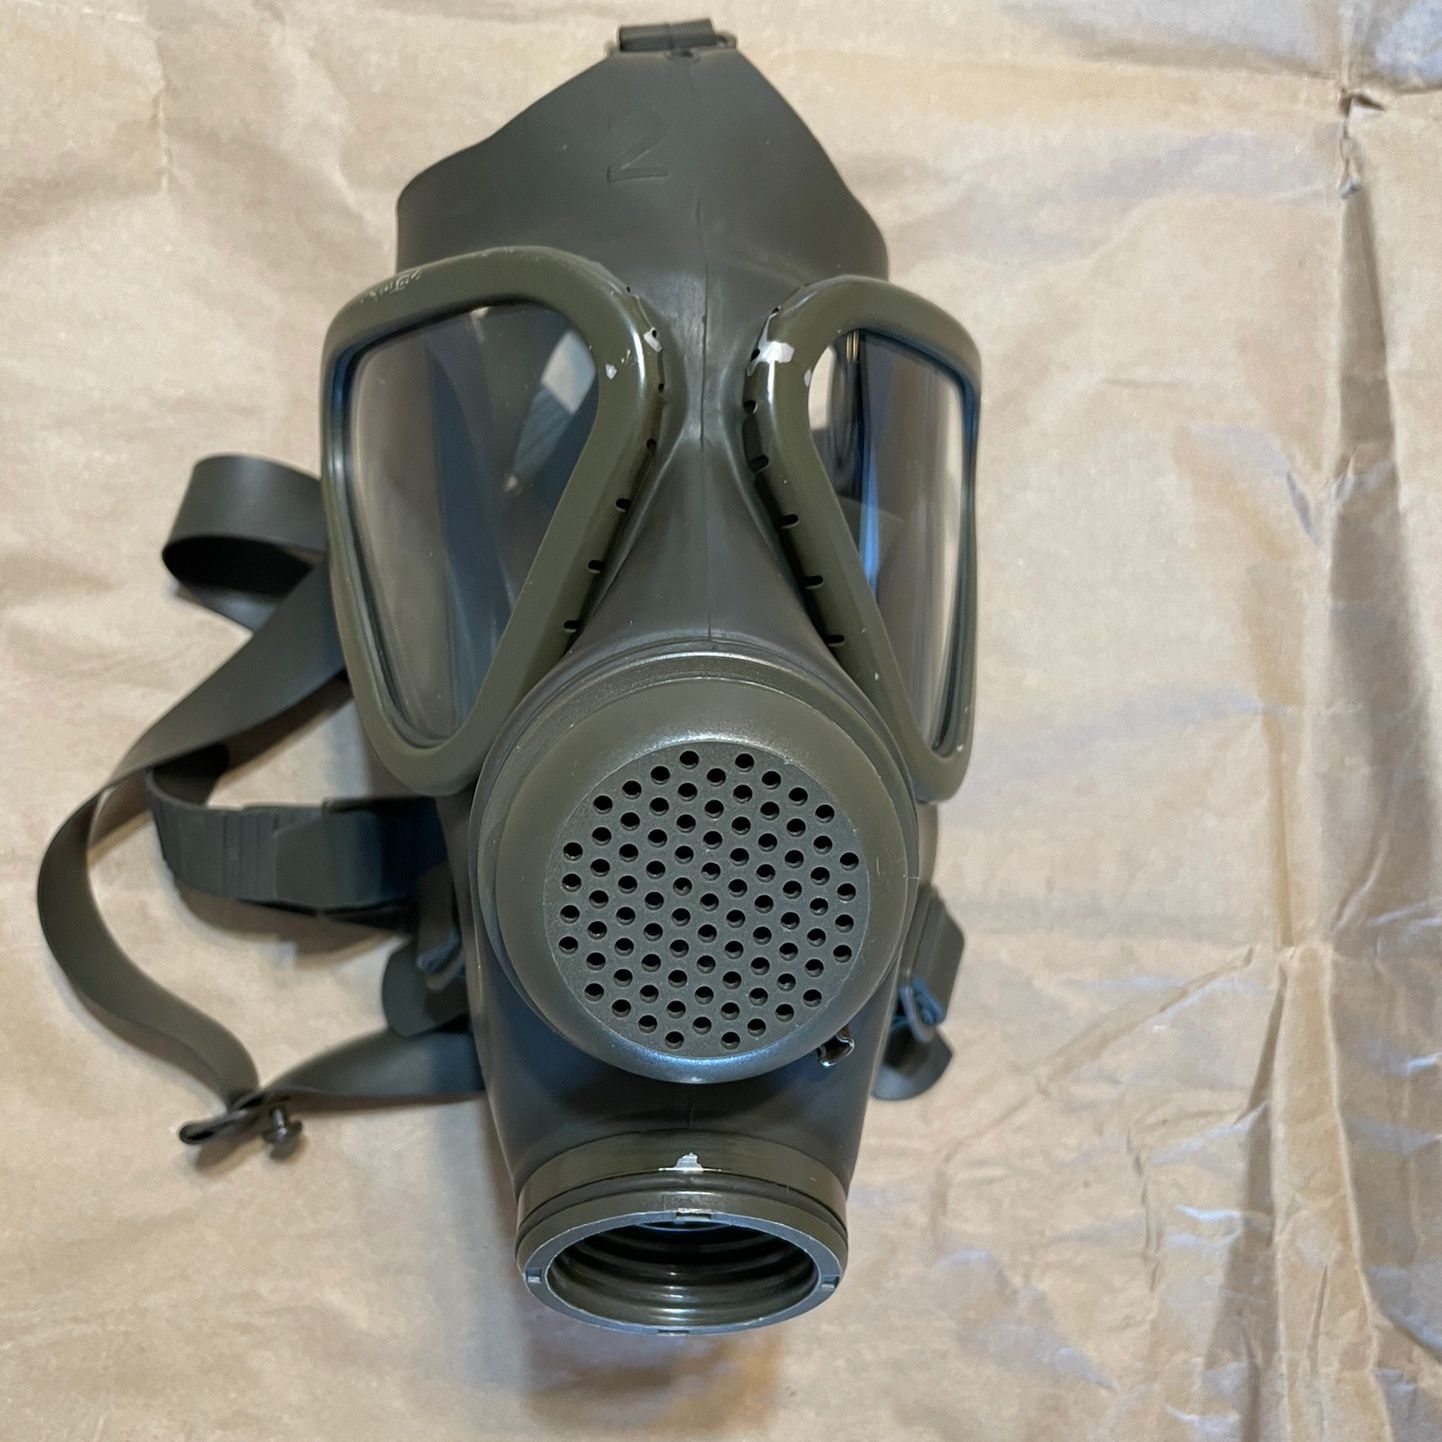 Geman M65 Gas Mask In Germany for in Poway, CA - OfferUp